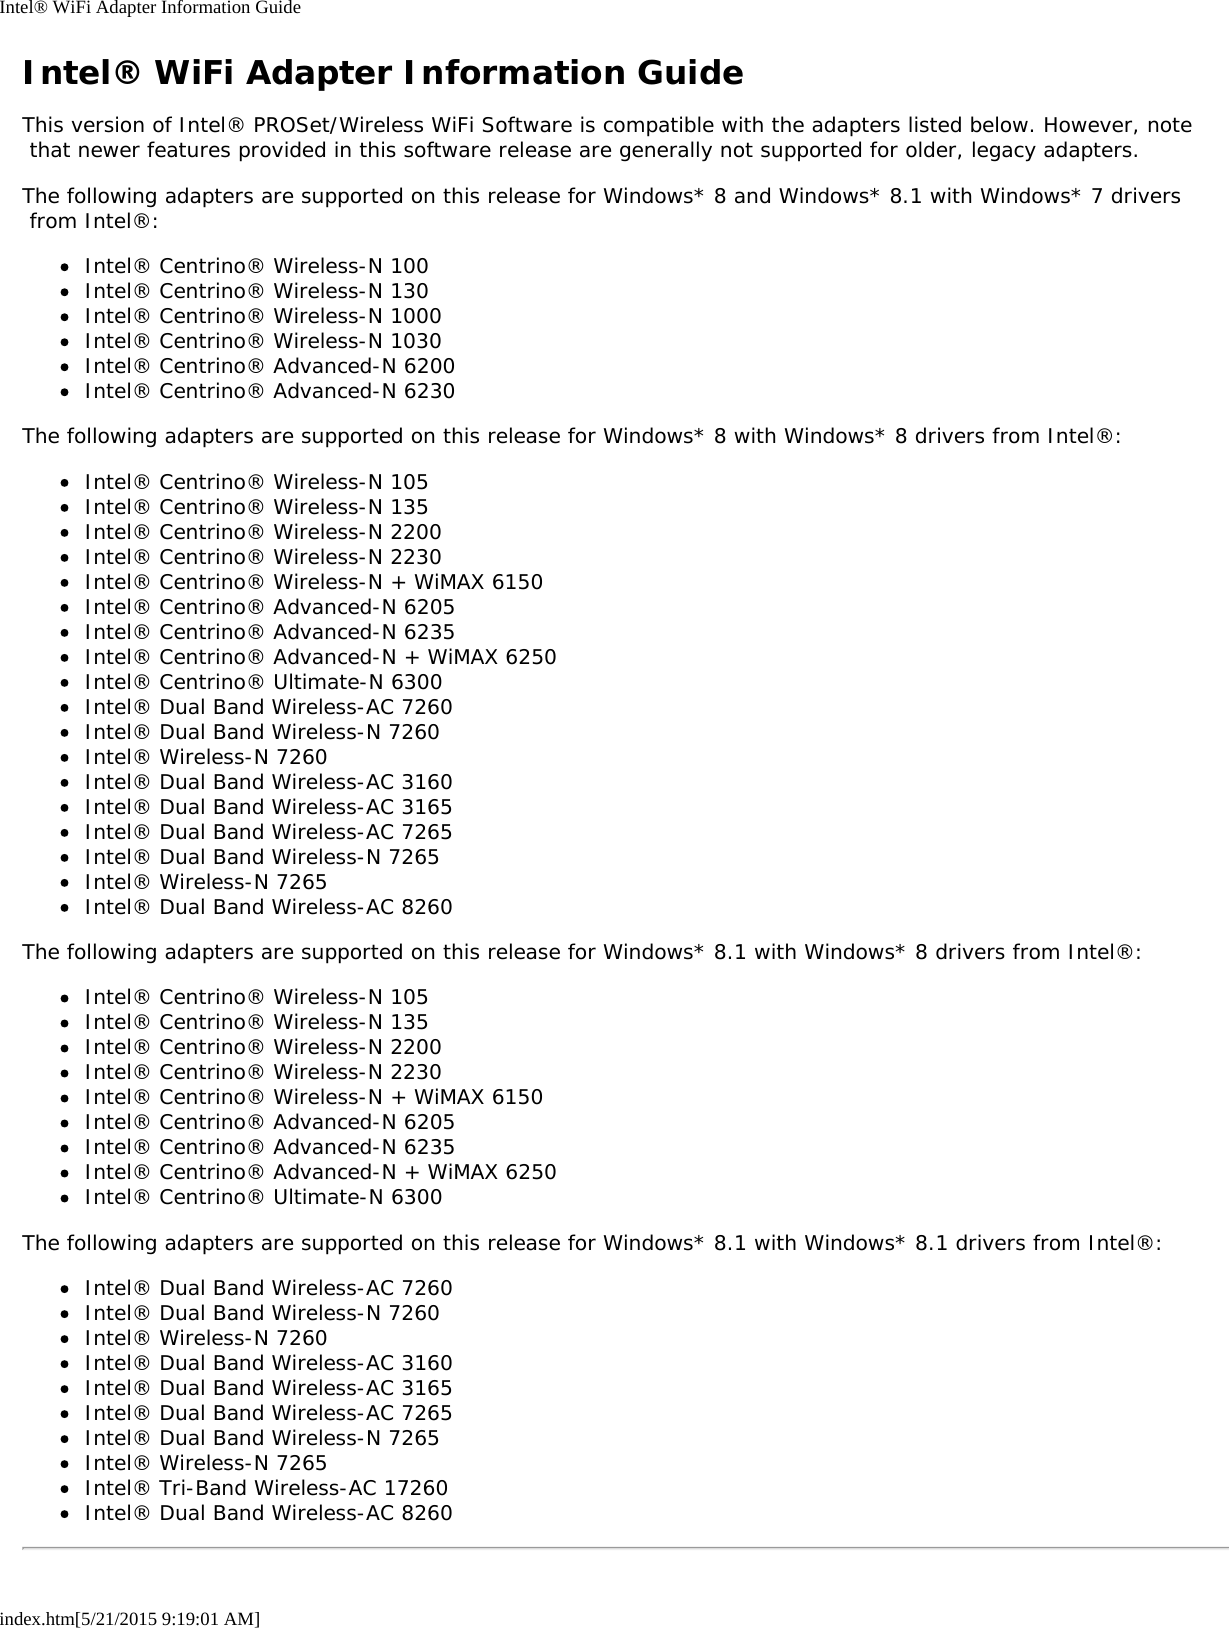 Intel® WiFi Adapter Information Guideindex.htm[5/21/2015 9:19:01 AM]Intel® WiFi Adapter Information GuideThis version of Intel® PROSet/Wireless WiFi Software is compatible with the adapters listed below. However, note that newer features provided in this software release are generally not supported for older, legacy adapters.The following adapters are supported on this release for Windows* 8 and Windows* 8.1 with Windows* 7 drivers from Intel®:Intel® Centrino® Wireless-N 100Intel® Centrino® Wireless-N 130Intel® Centrino® Wireless-N 1000Intel® Centrino® Wireless-N 1030Intel® Centrino® Advanced-N 6200Intel® Centrino® Advanced-N 6230The following adapters are supported on this release for Windows* 8 with Windows* 8 drivers from Intel®:Intel® Centrino® Wireless-N 105Intel® Centrino® Wireless-N 135Intel® Centrino® Wireless-N 2200Intel® Centrino® Wireless-N 2230Intel® Centrino® Wireless-N + WiMAX 6150Intel® Centrino® Advanced-N 6205Intel® Centrino® Advanced-N 6235Intel® Centrino® Advanced-N + WiMAX 6250Intel® Centrino® Ultimate-N 6300Intel® Dual Band Wireless-AC 7260Intel® Dual Band Wireless-N 7260Intel® Wireless-N 7260Intel® Dual Band Wireless-AC 3160Intel® Dual Band Wireless-AC 3165Intel® Dual Band Wireless-AC 7265Intel® Dual Band Wireless-N 7265Intel® Wireless-N 7265Intel® Dual Band Wireless-AC 8260The following adapters are supported on this release for Windows* 8.1 with Windows* 8 drivers from Intel®:Intel® Centrino® Wireless-N 105Intel® Centrino® Wireless-N 135Intel® Centrino® Wireless-N 2200Intel® Centrino® Wireless-N 2230Intel® Centrino® Wireless-N + WiMAX 6150Intel® Centrino® Advanced-N 6205Intel® Centrino® Advanced-N 6235Intel® Centrino® Advanced-N + WiMAX 6250Intel® Centrino® Ultimate-N 6300The following adapters are supported on this release for Windows* 8.1 with Windows* 8.1 drivers from Intel®:Intel® Dual Band Wireless-AC 7260Intel® Dual Band Wireless-N 7260Intel® Wireless-N 7260Intel® Dual Band Wireless-AC 3160Intel® Dual Band Wireless-AC 3165Intel® Dual Band Wireless-AC 7265Intel® Dual Band Wireless-N 7265Intel® Wireless-N 7265Intel® Tri-Band Wireless-AC 17260Intel® Dual Band Wireless-AC 8260